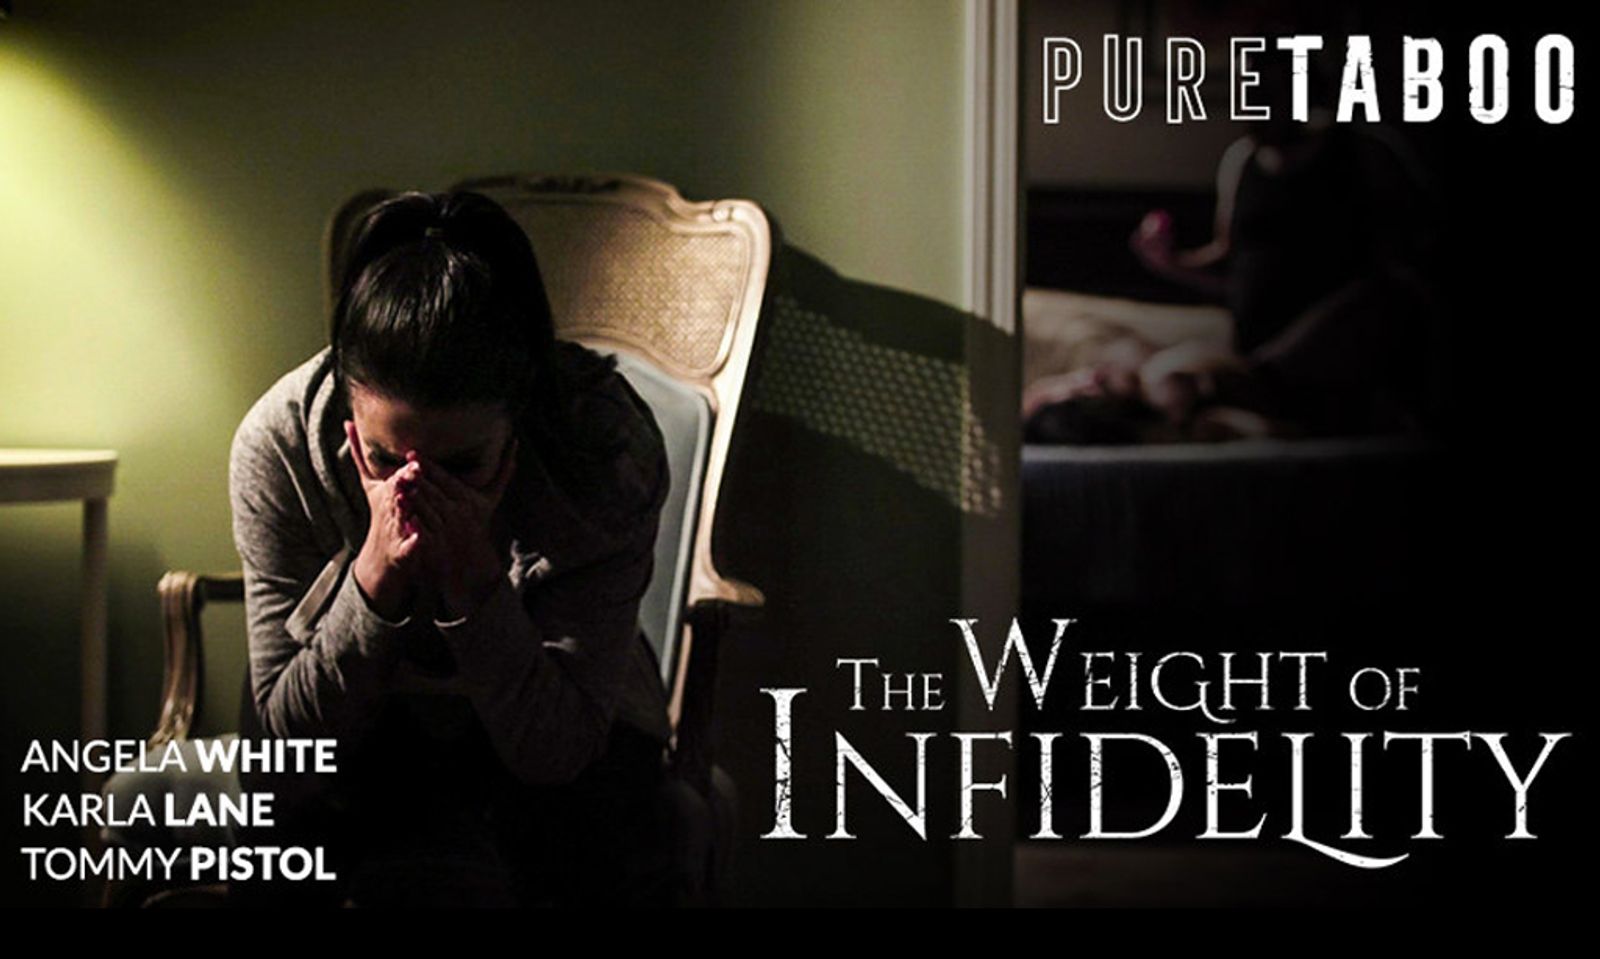 Angela White Teams With Bree Mills for 'The Weight of Infidelity'